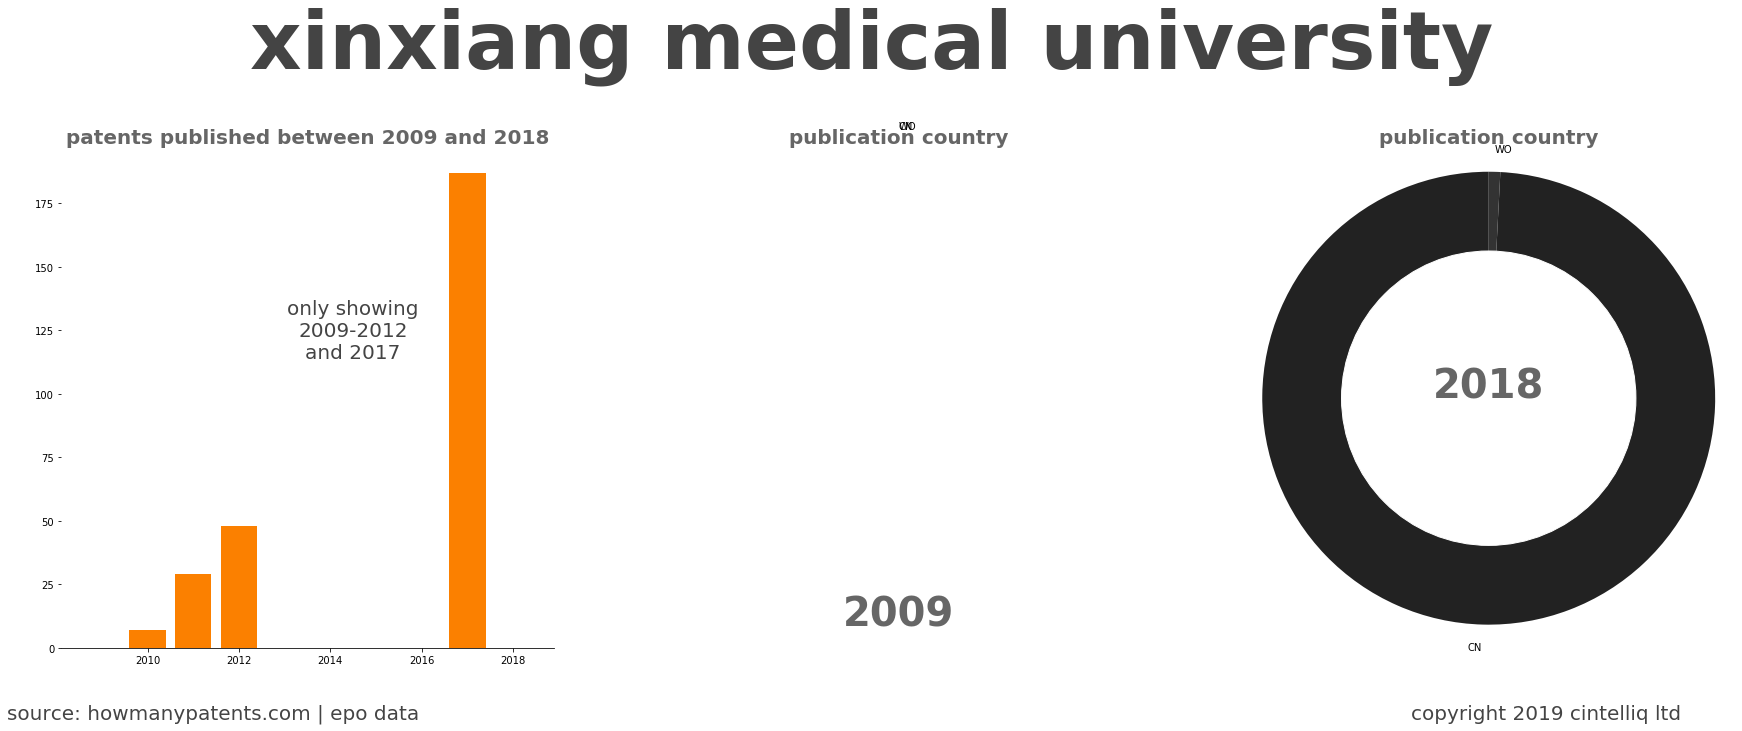 summary of patents for Xinxiang Medical University